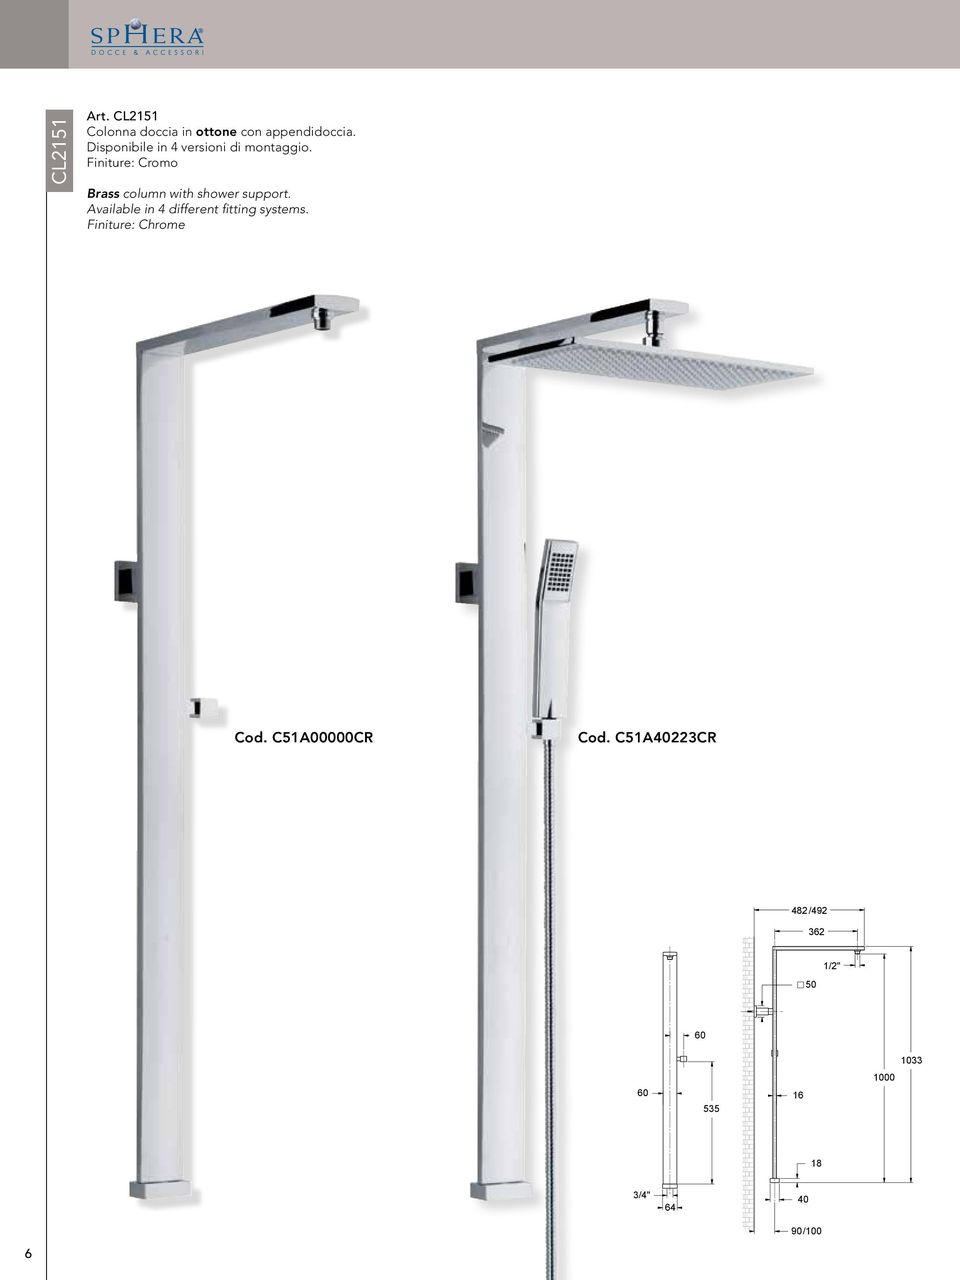 Finiture: Cromo Brass column with shower support.